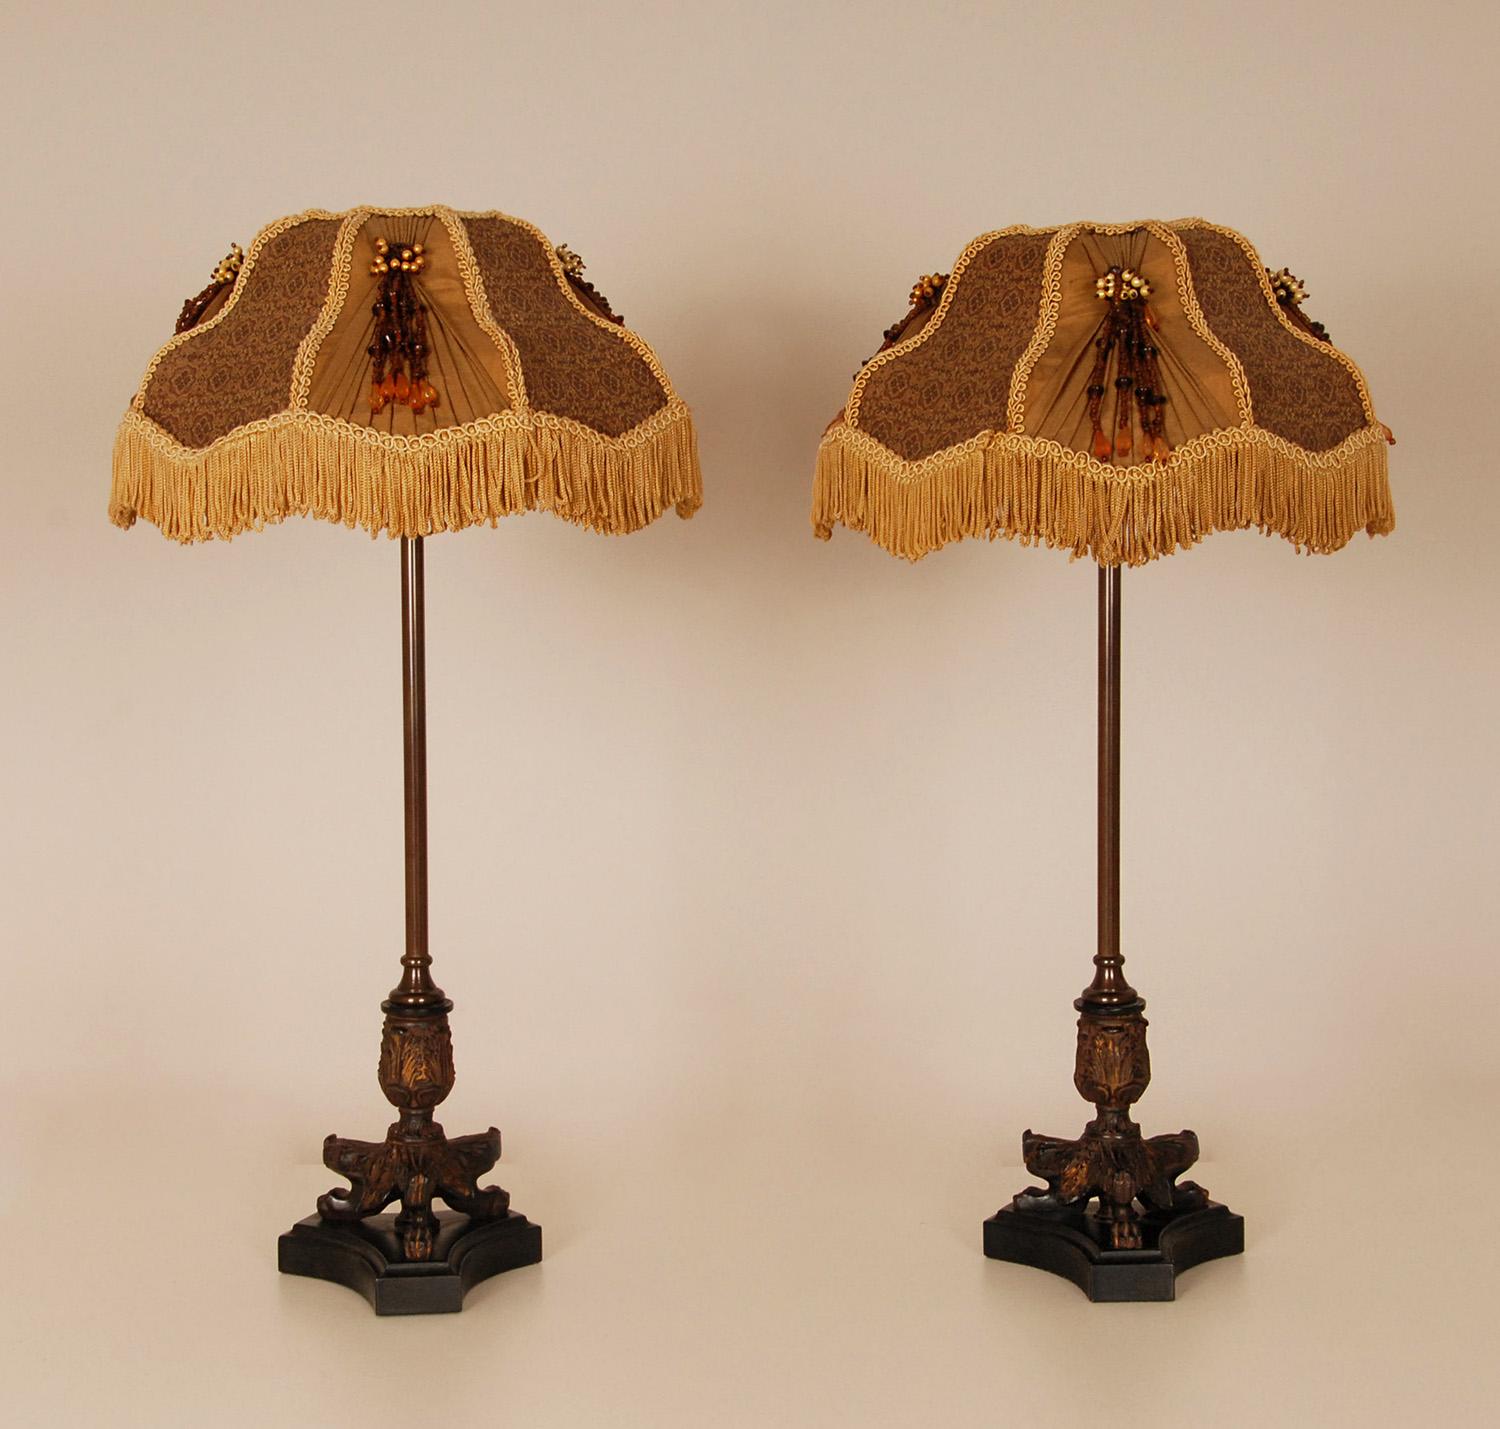 Hand-Crafted Vintage French Napoleonic Table Lamps Tripod Base Lion Paws Empire Lamps a Pair For Sale